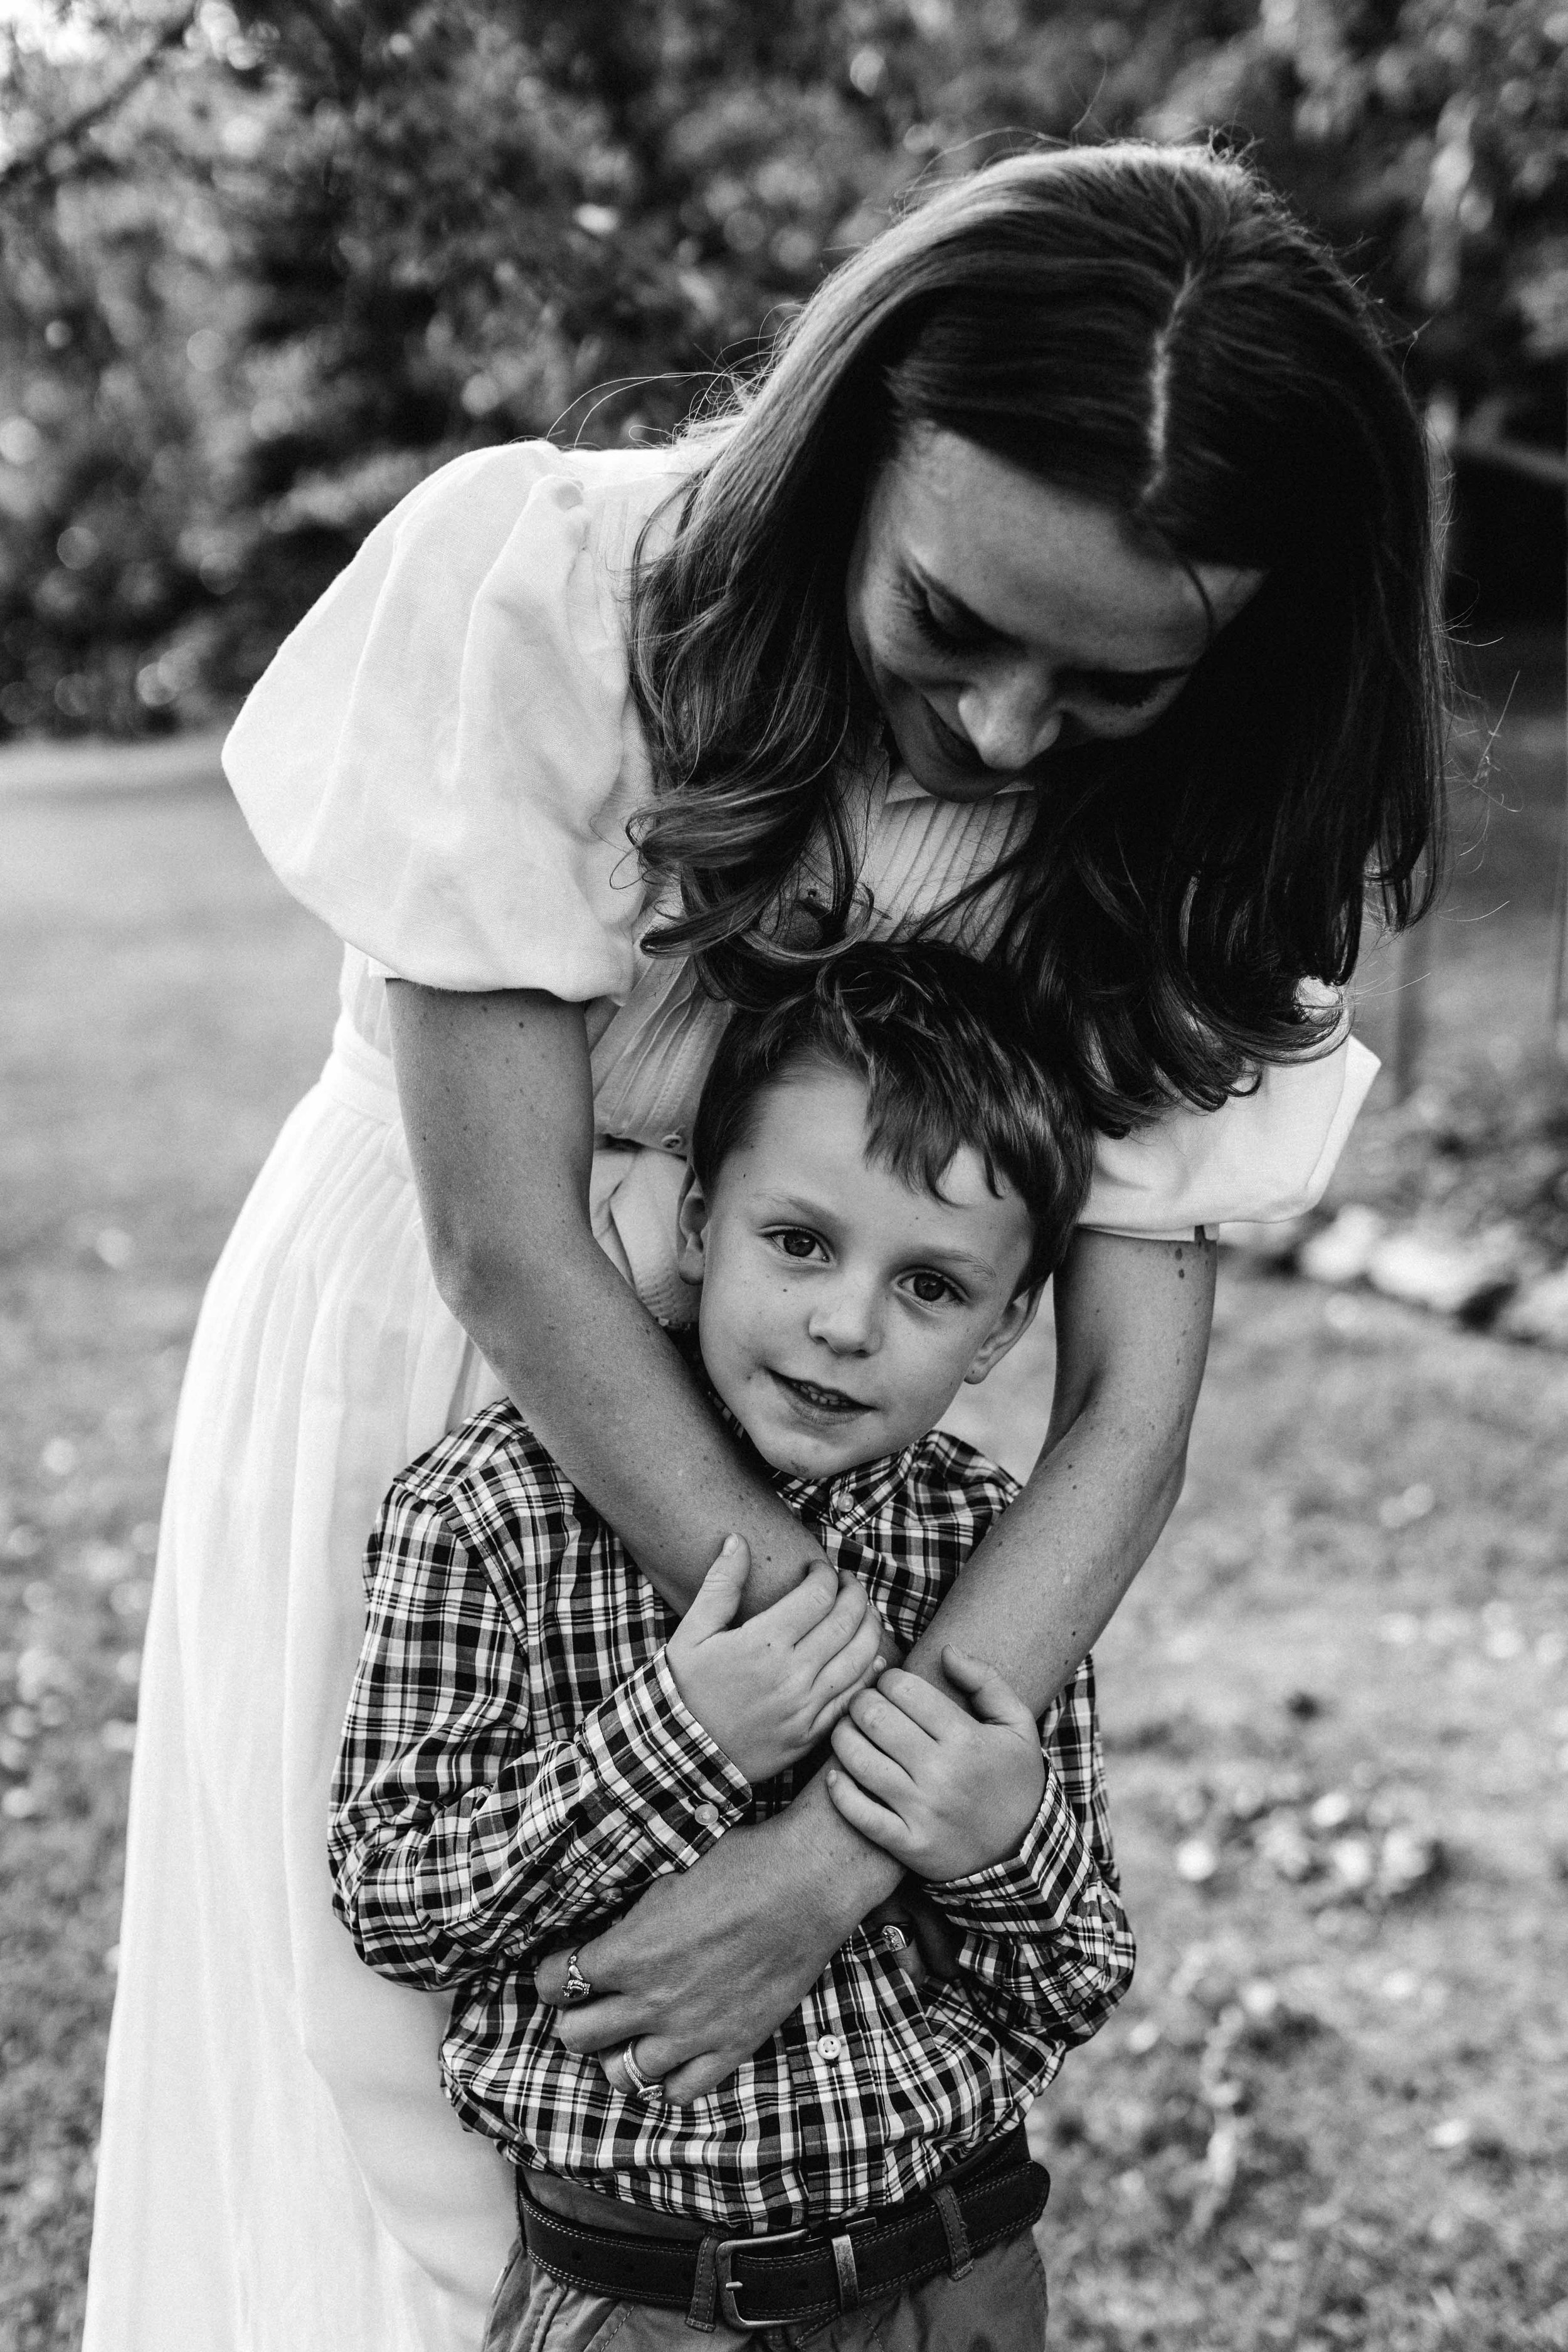 mittagong-bowral-southern-highlands-family-photography-www.emilyobrienphotography.net-lee-family-session-17.jpg